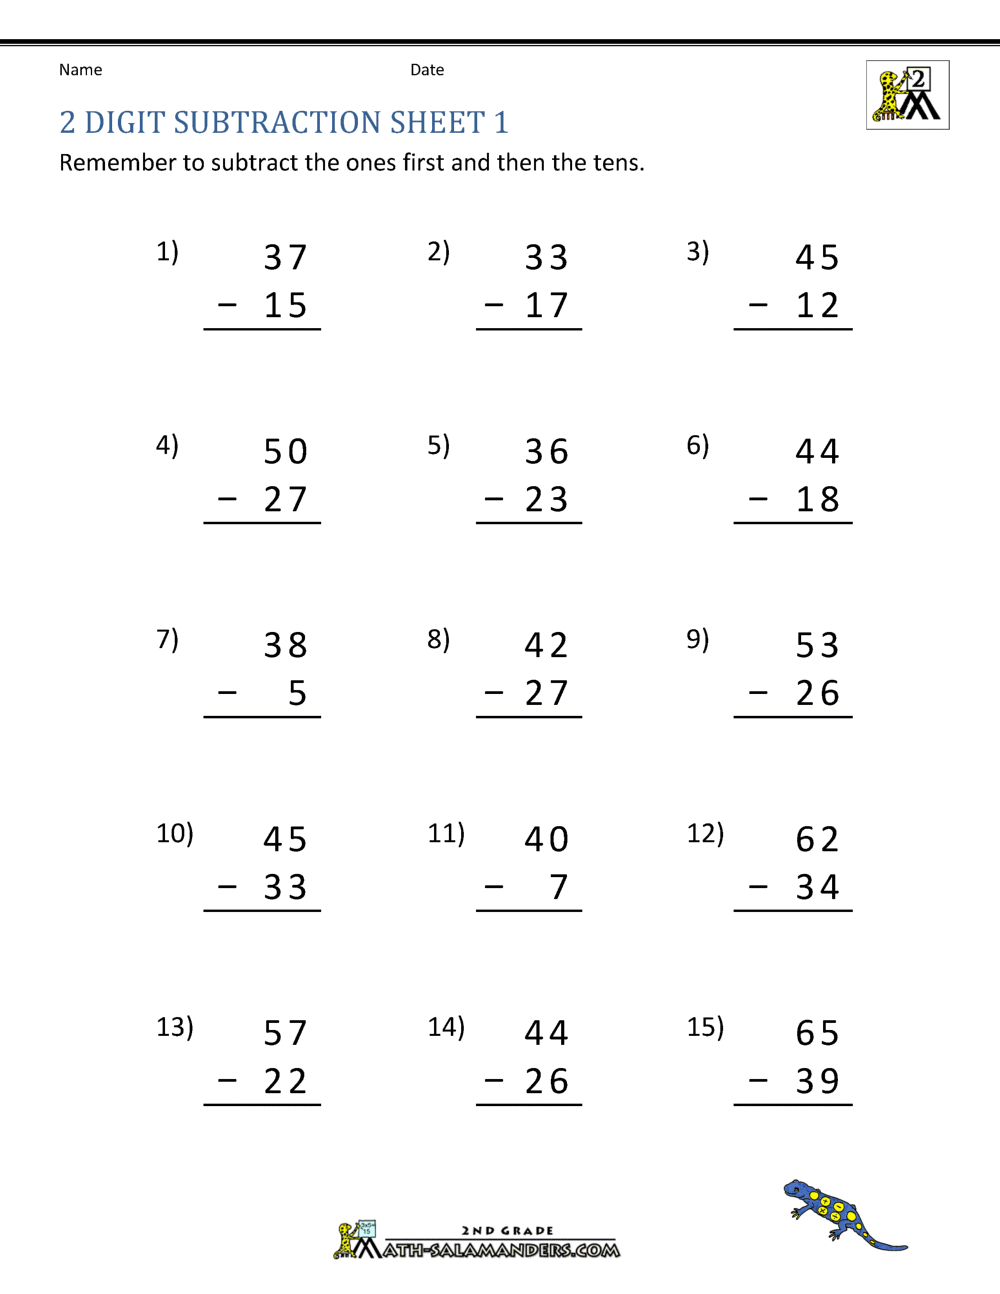 subtracting-fractions-with-regrouping-worksheet-with-answer-key-printable-pdf-download